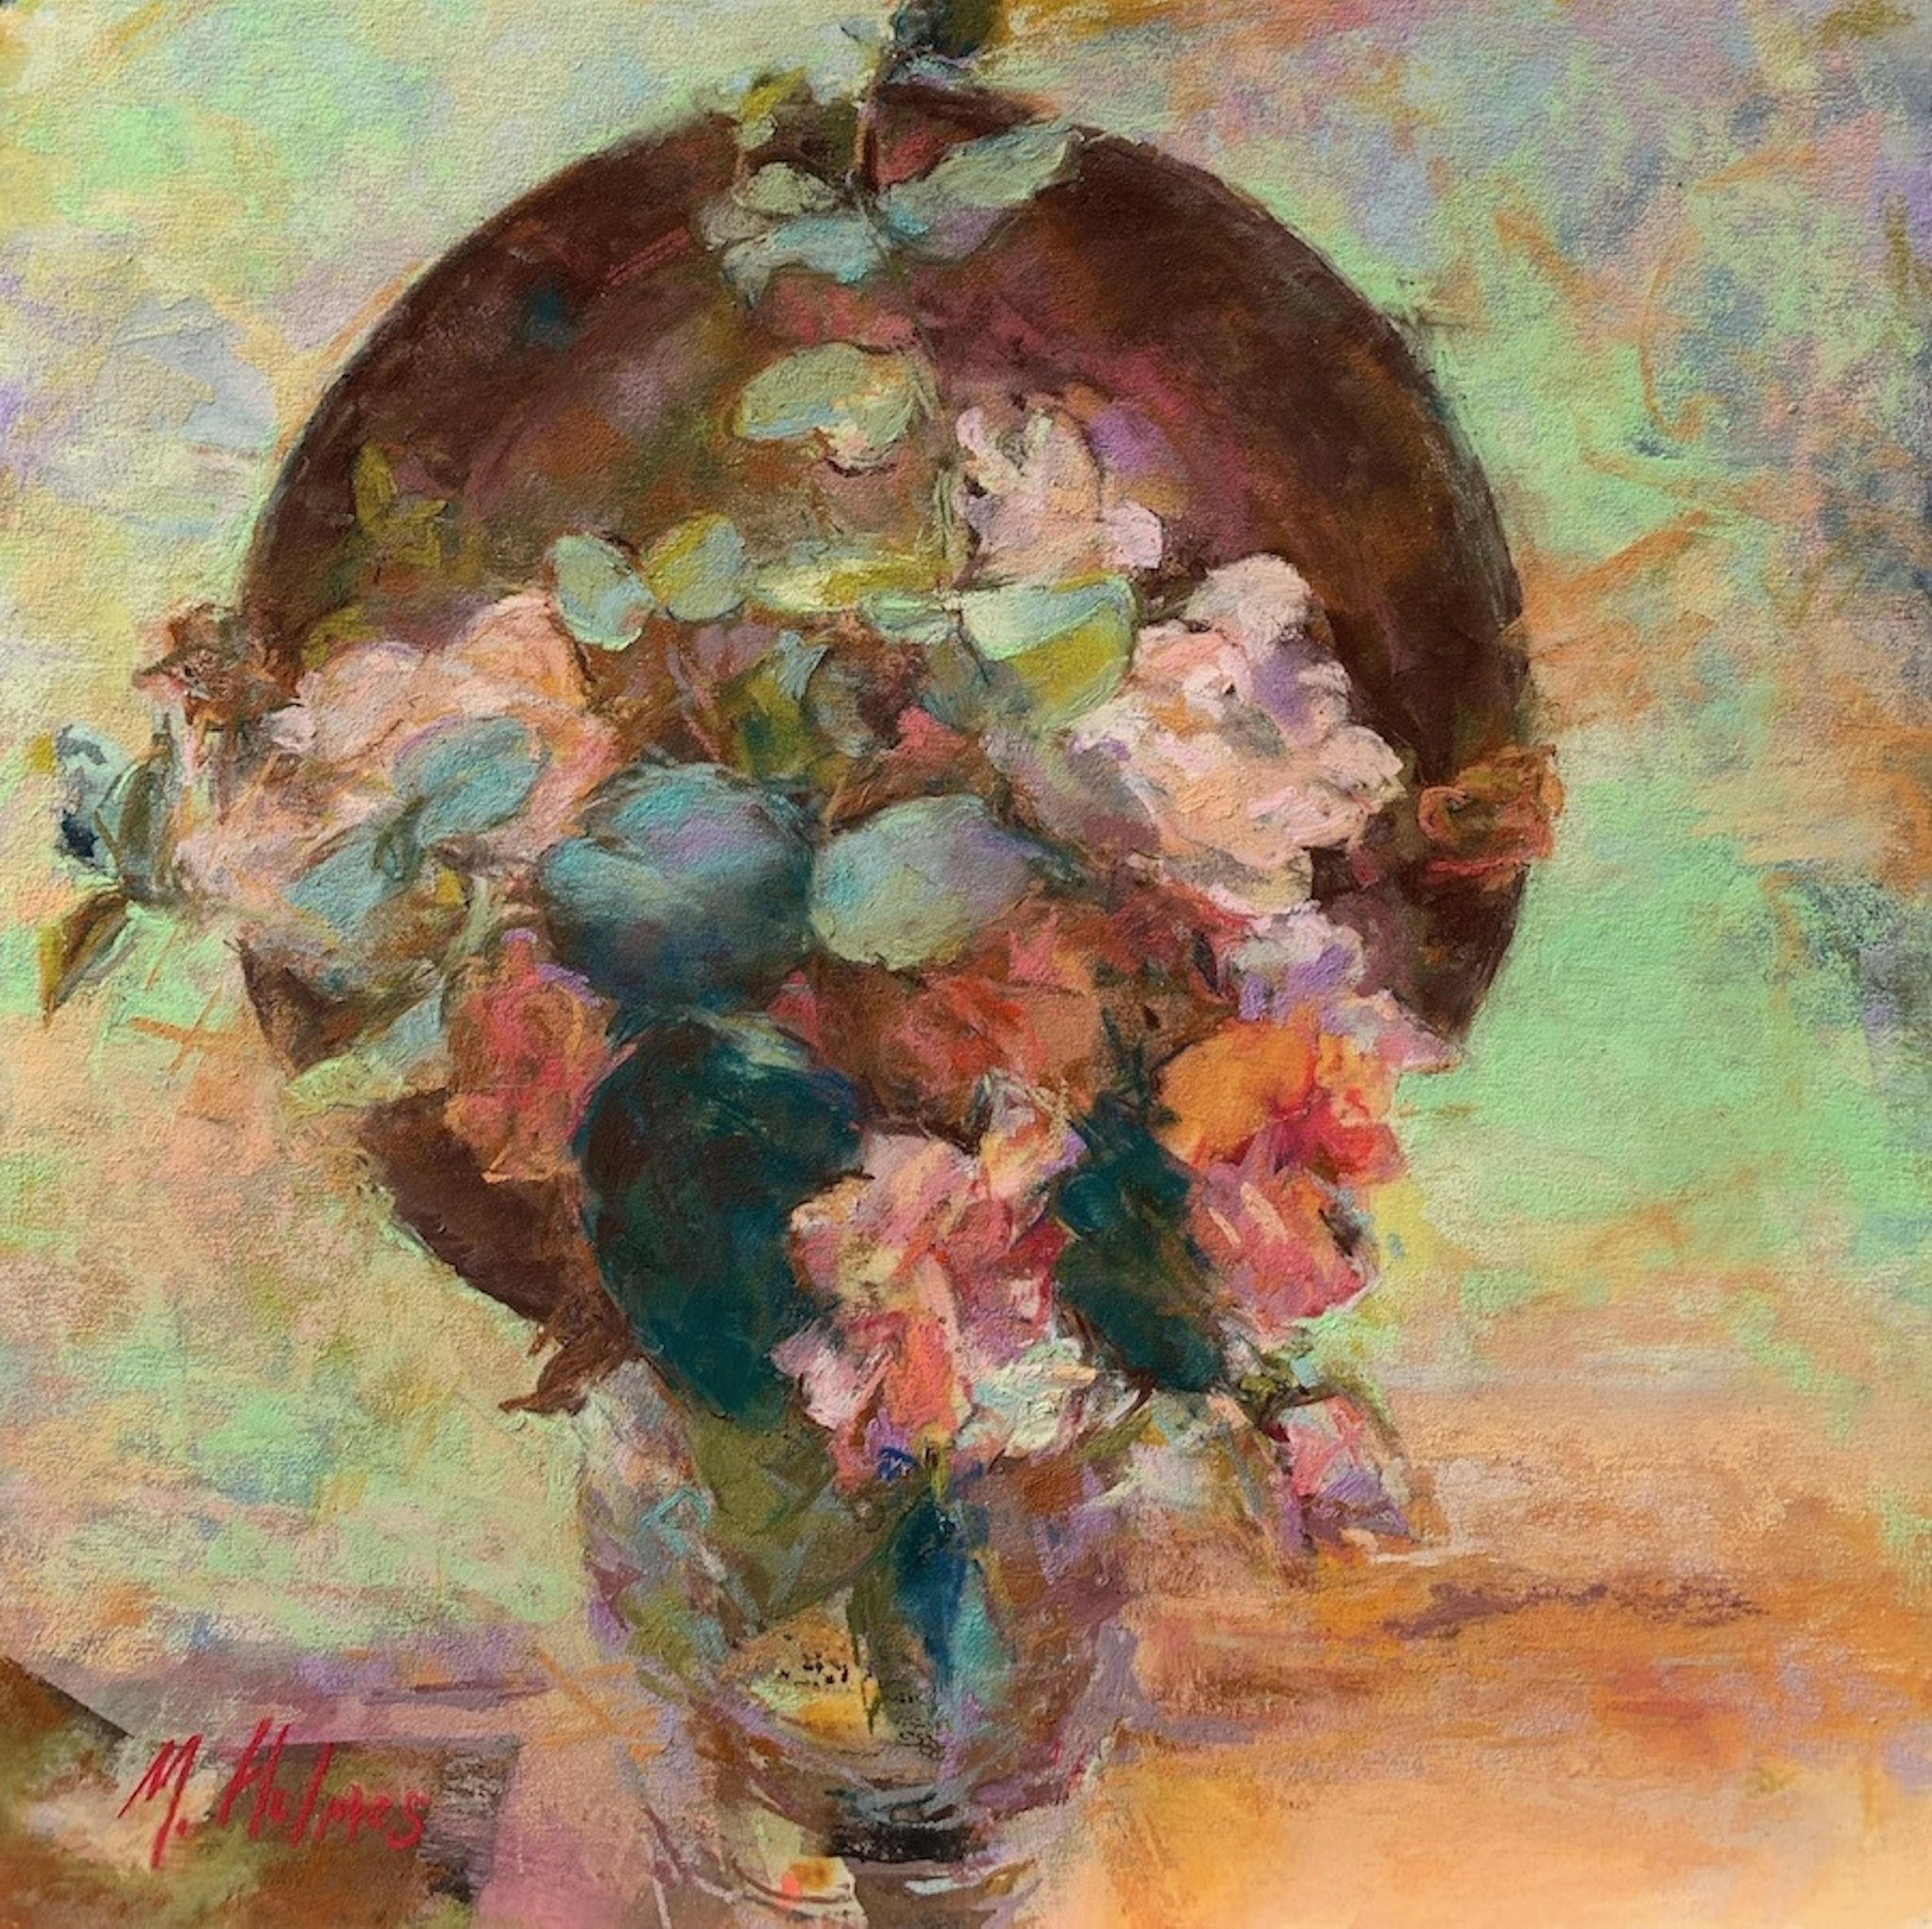 Best Floral - Marcia Holmes, "Rose and Eucalyptus Bouquet," pastel, 12 x 12 in. Private Collection